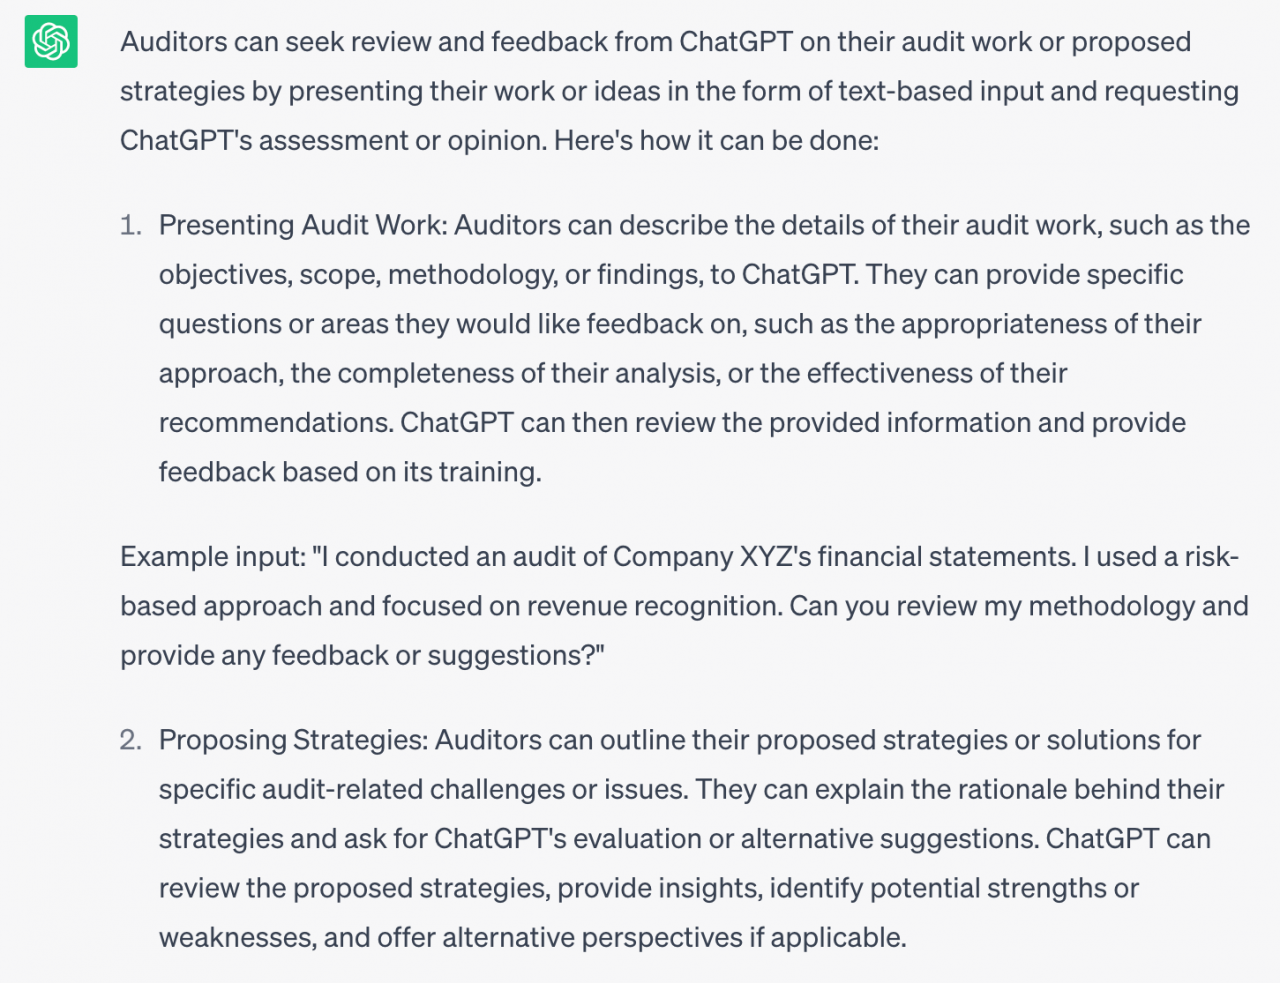 Two ways ChatGPT can train auditors